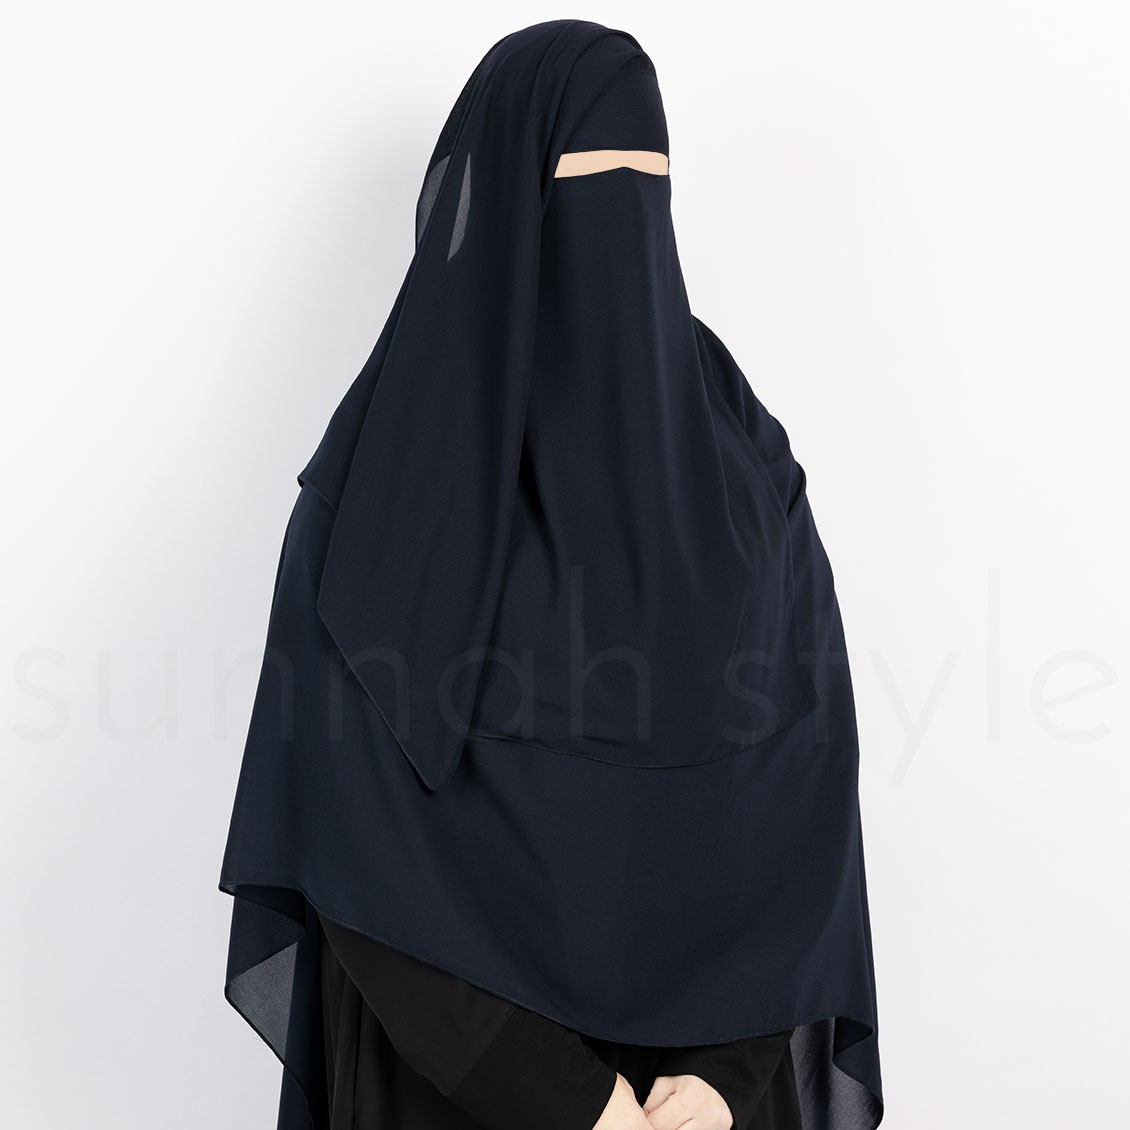 Sunnah Style Two Layer Niqab Navy Blue